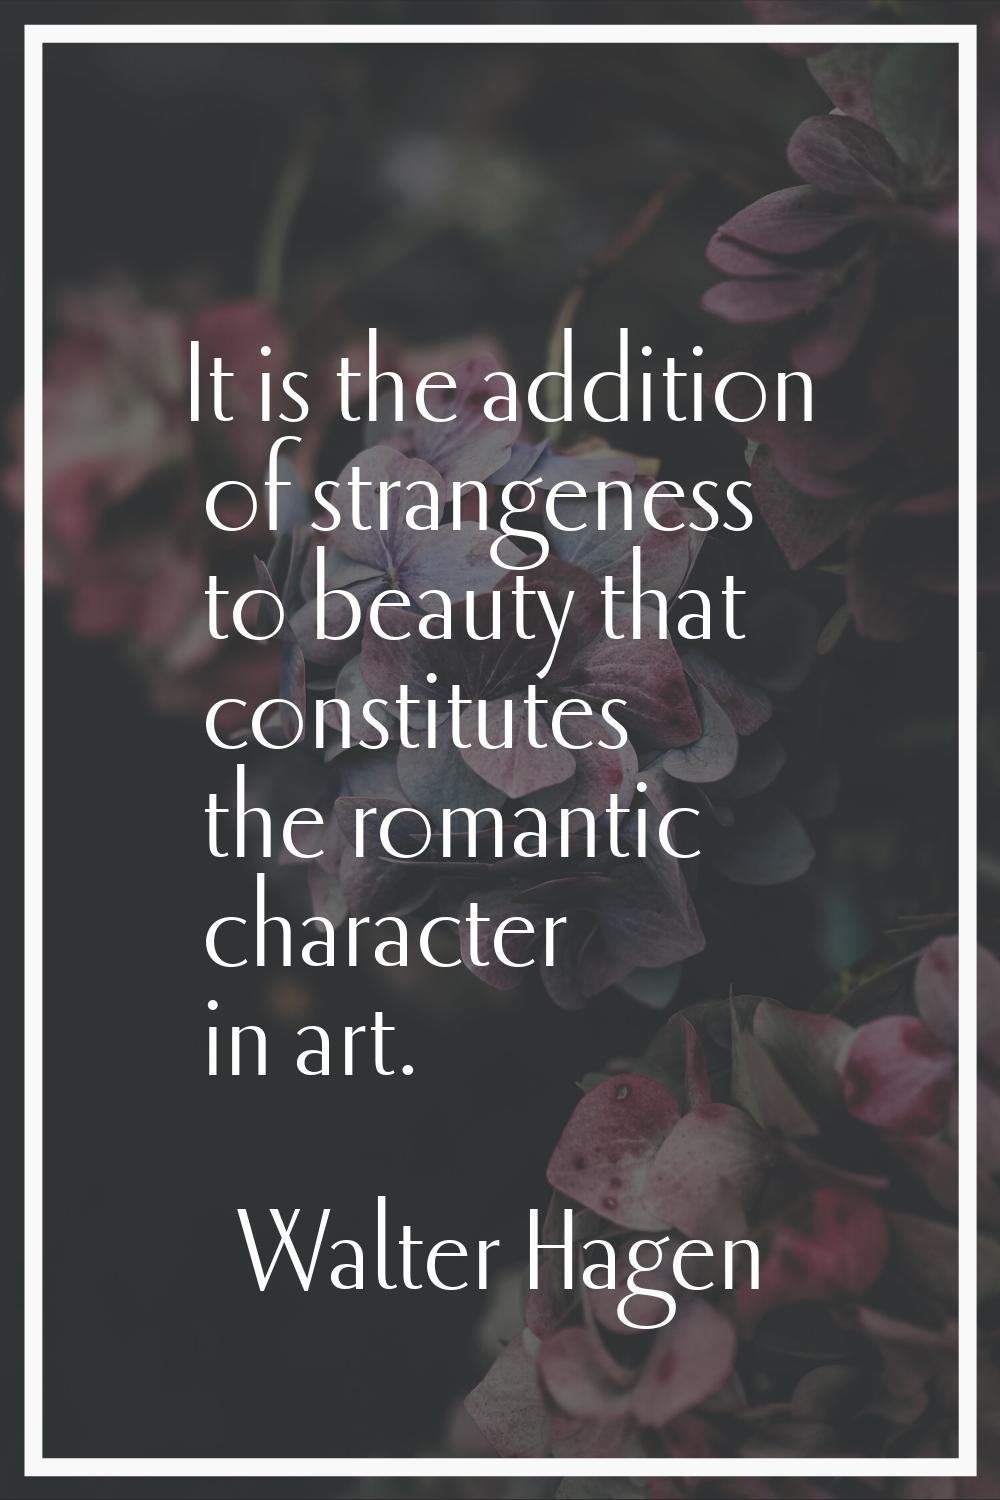 It is the addition of strangeness to beauty that constitutes the romantic character in art.